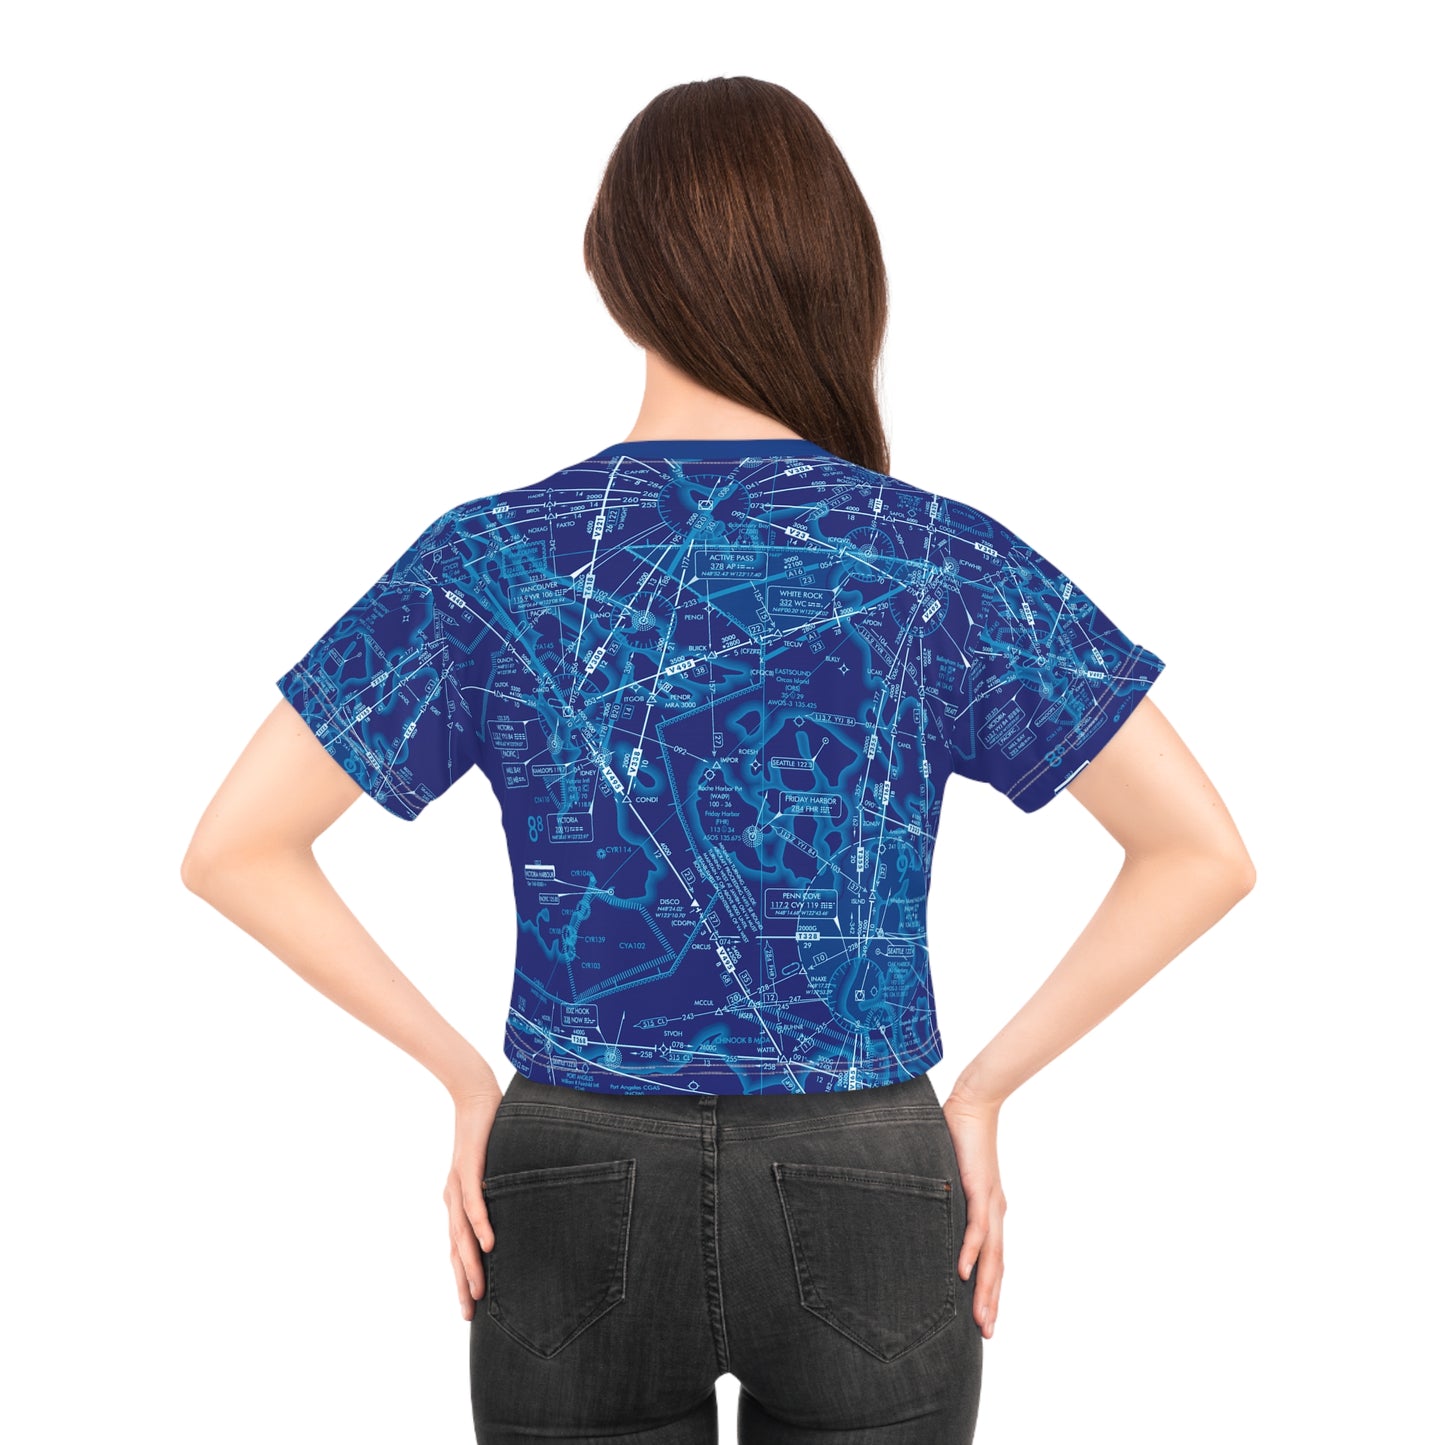 Enroute Low Altitude Chart (blue) crop tee